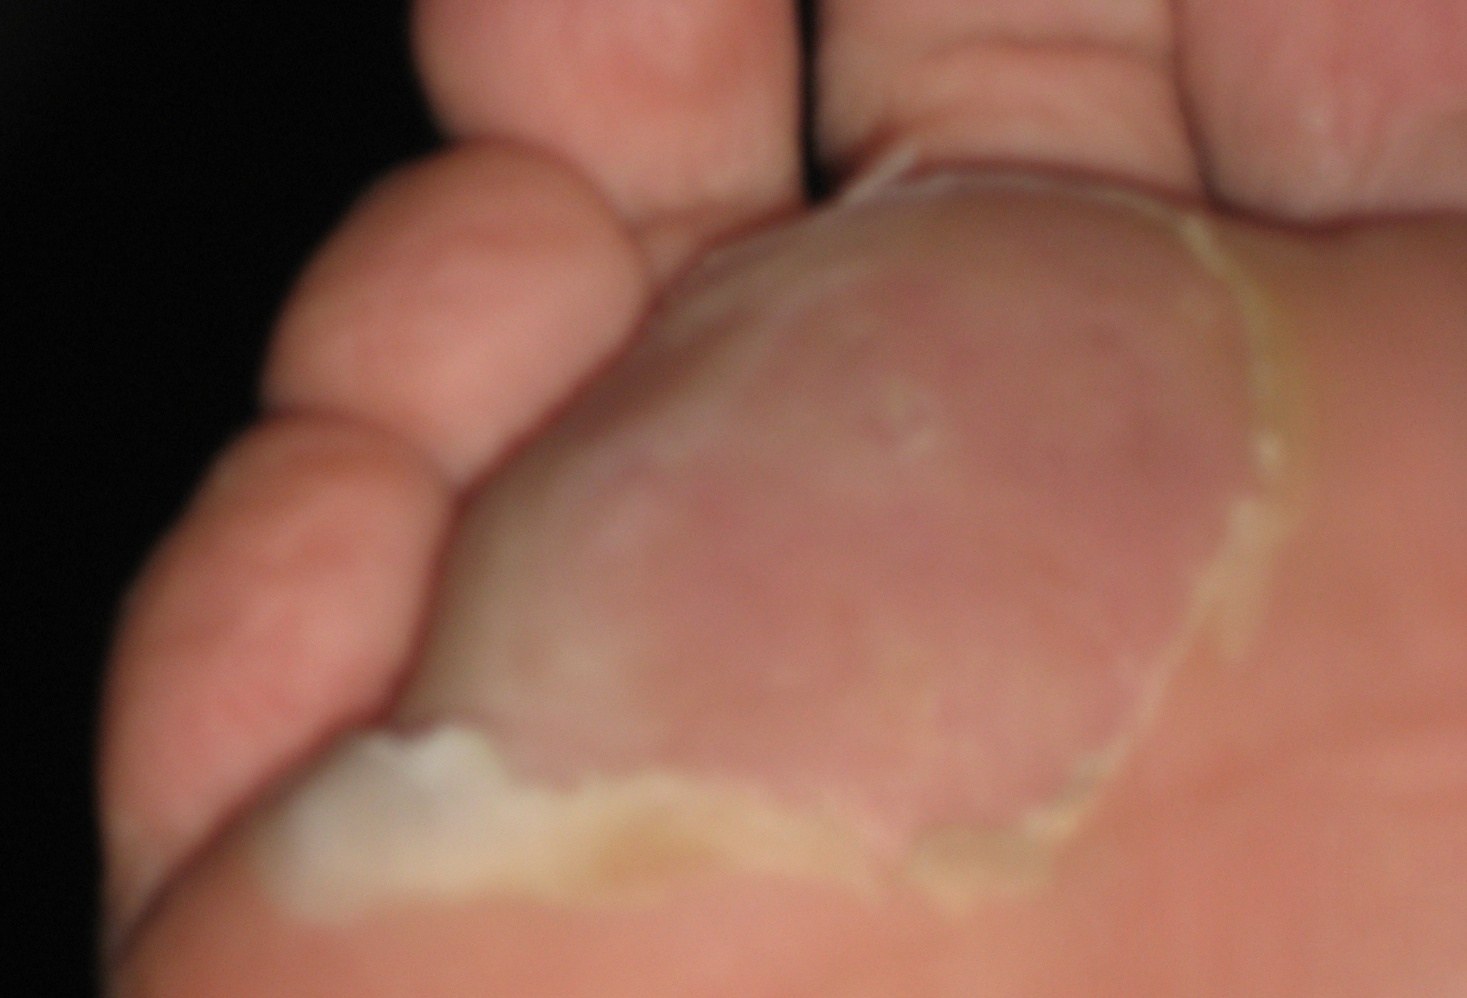 DS8 Blister recovered